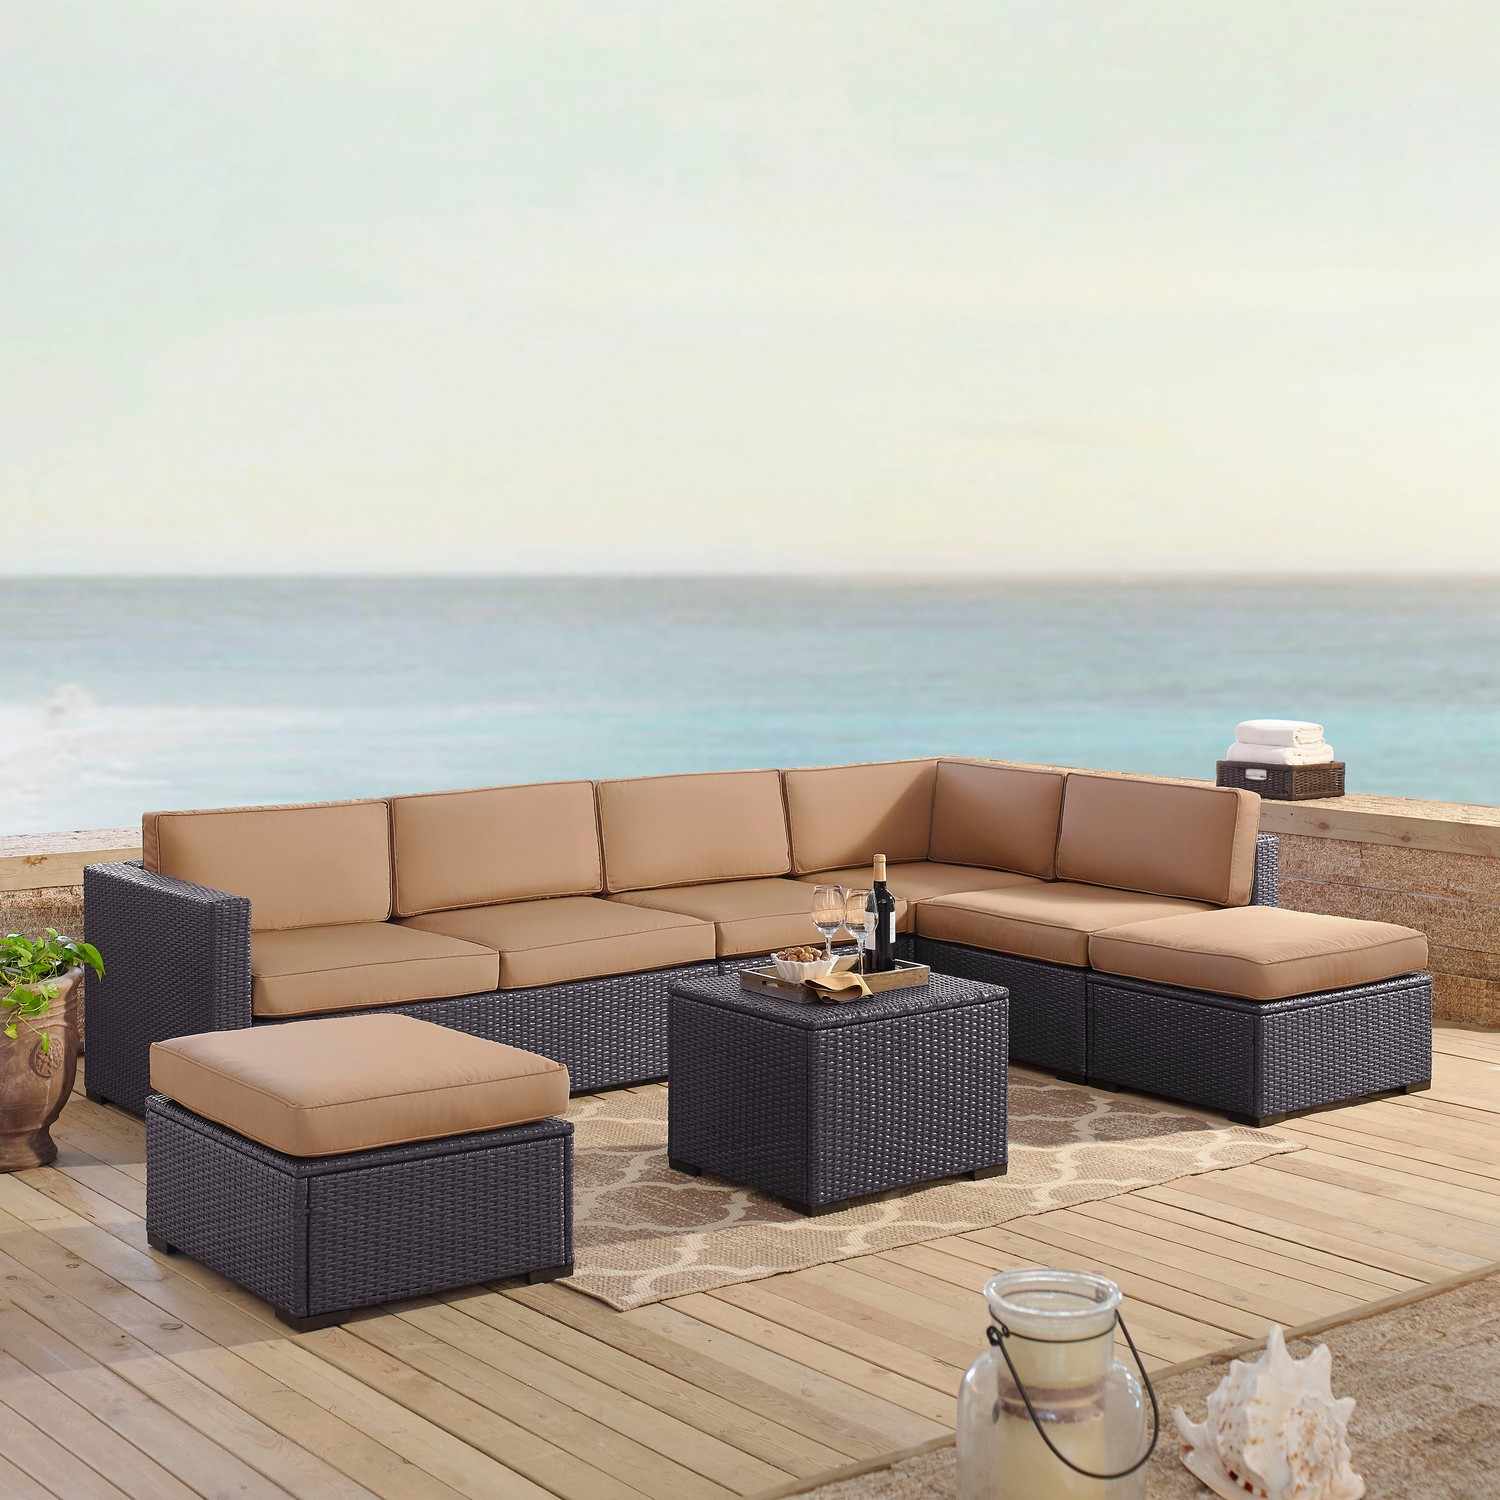 Crosley Biscayne 6-PC Outdoor Wicker Sectional Set - 2 Loveseats, Armless Chair, Coffee Table, 2 Ottomans - Mocha/Brown